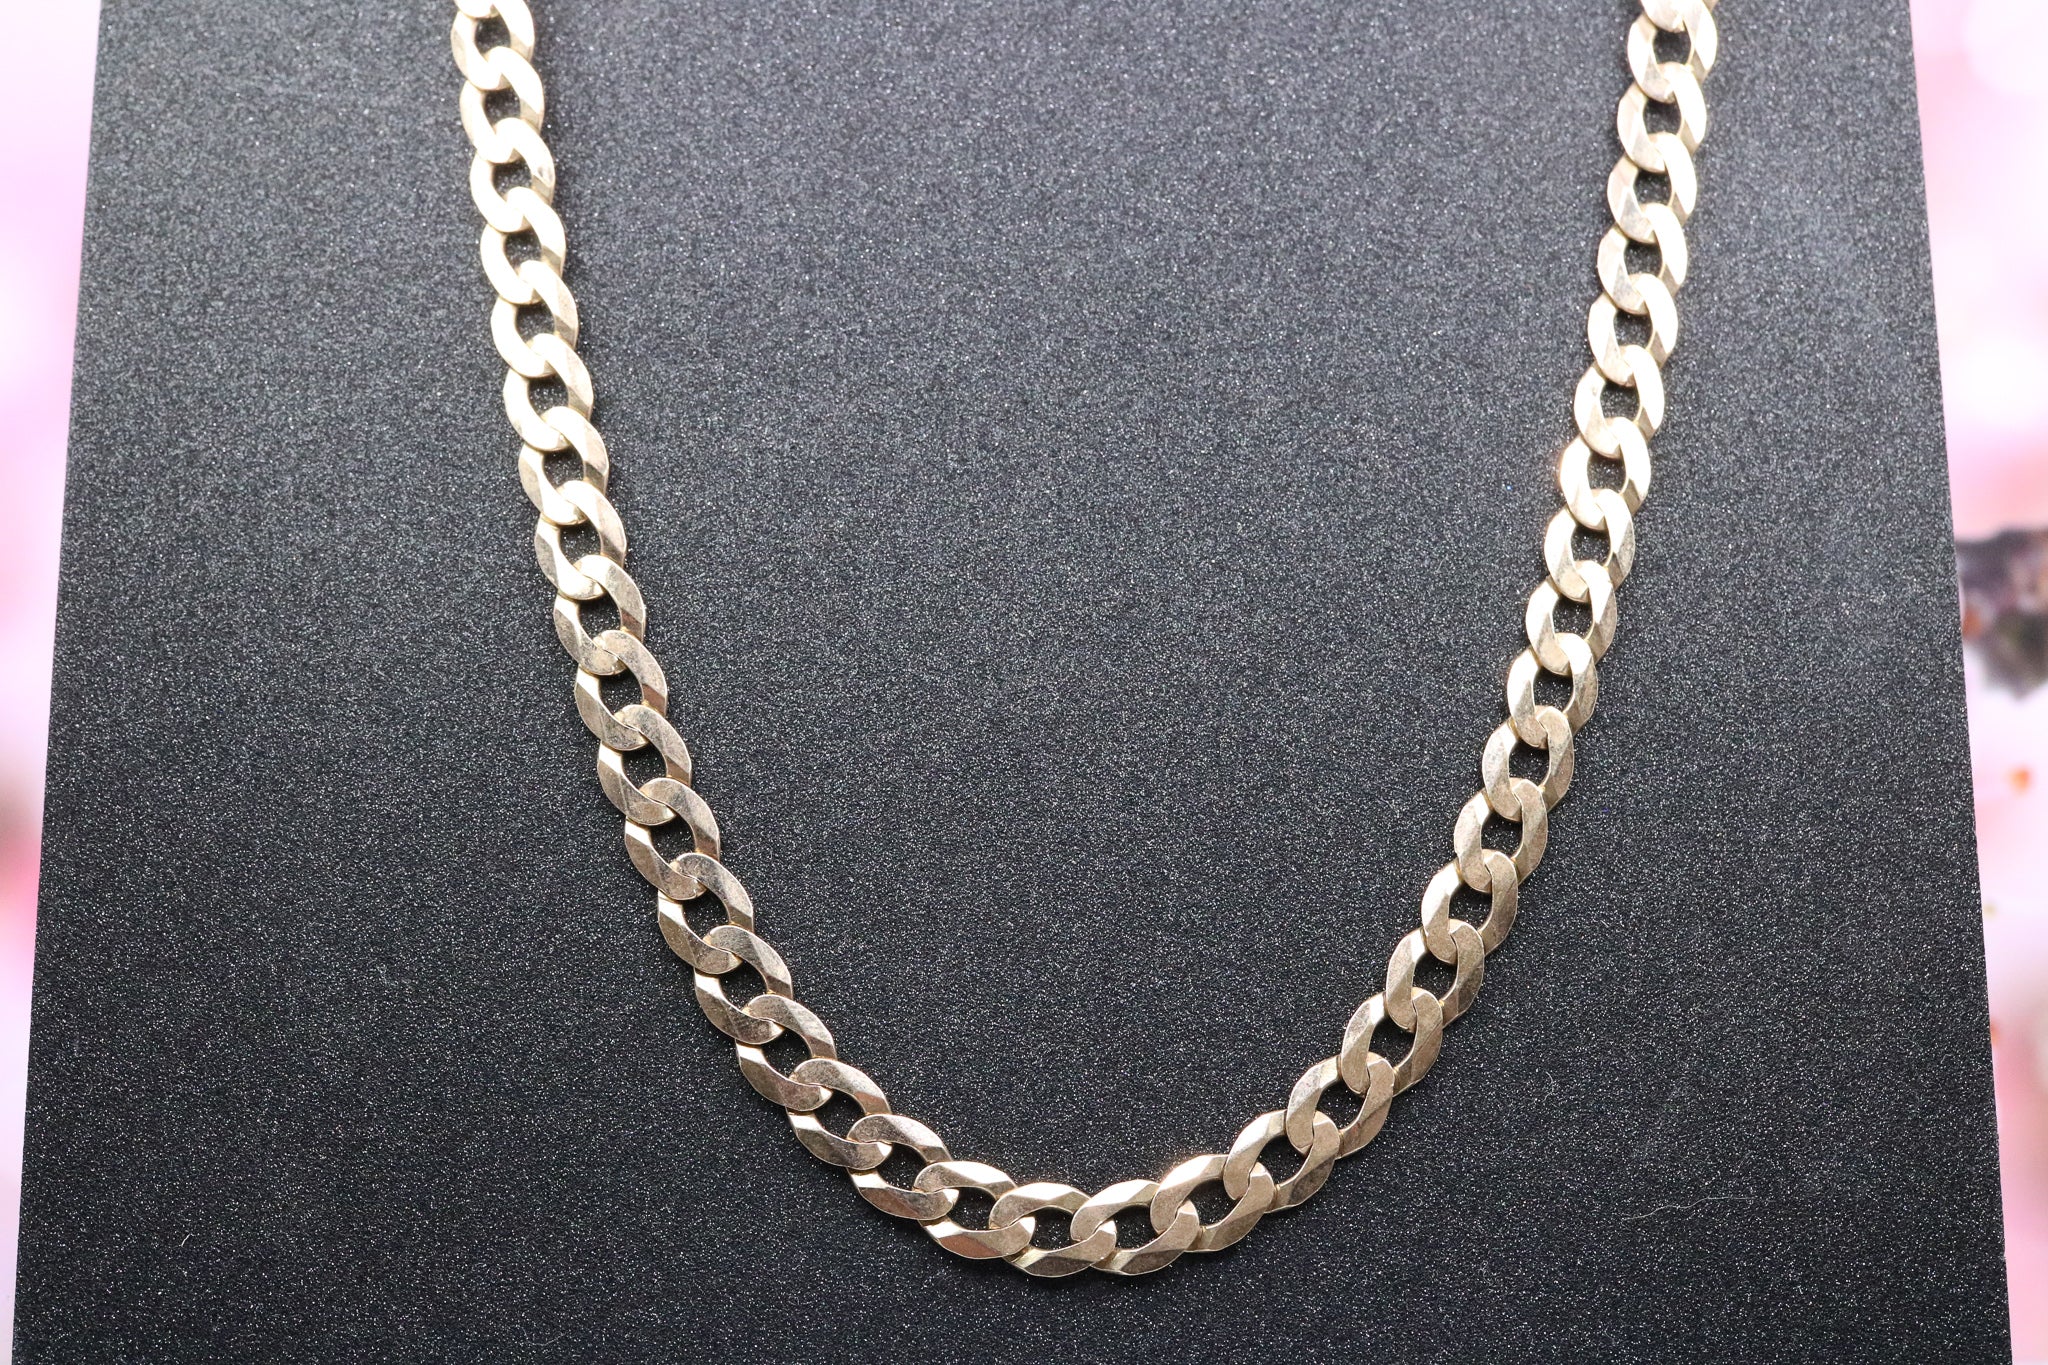 9ct Yellow Gold Gents Curb Chain - HJ2434 - Hallmark Jewellers Formby & The Jewellers Bench Widnes